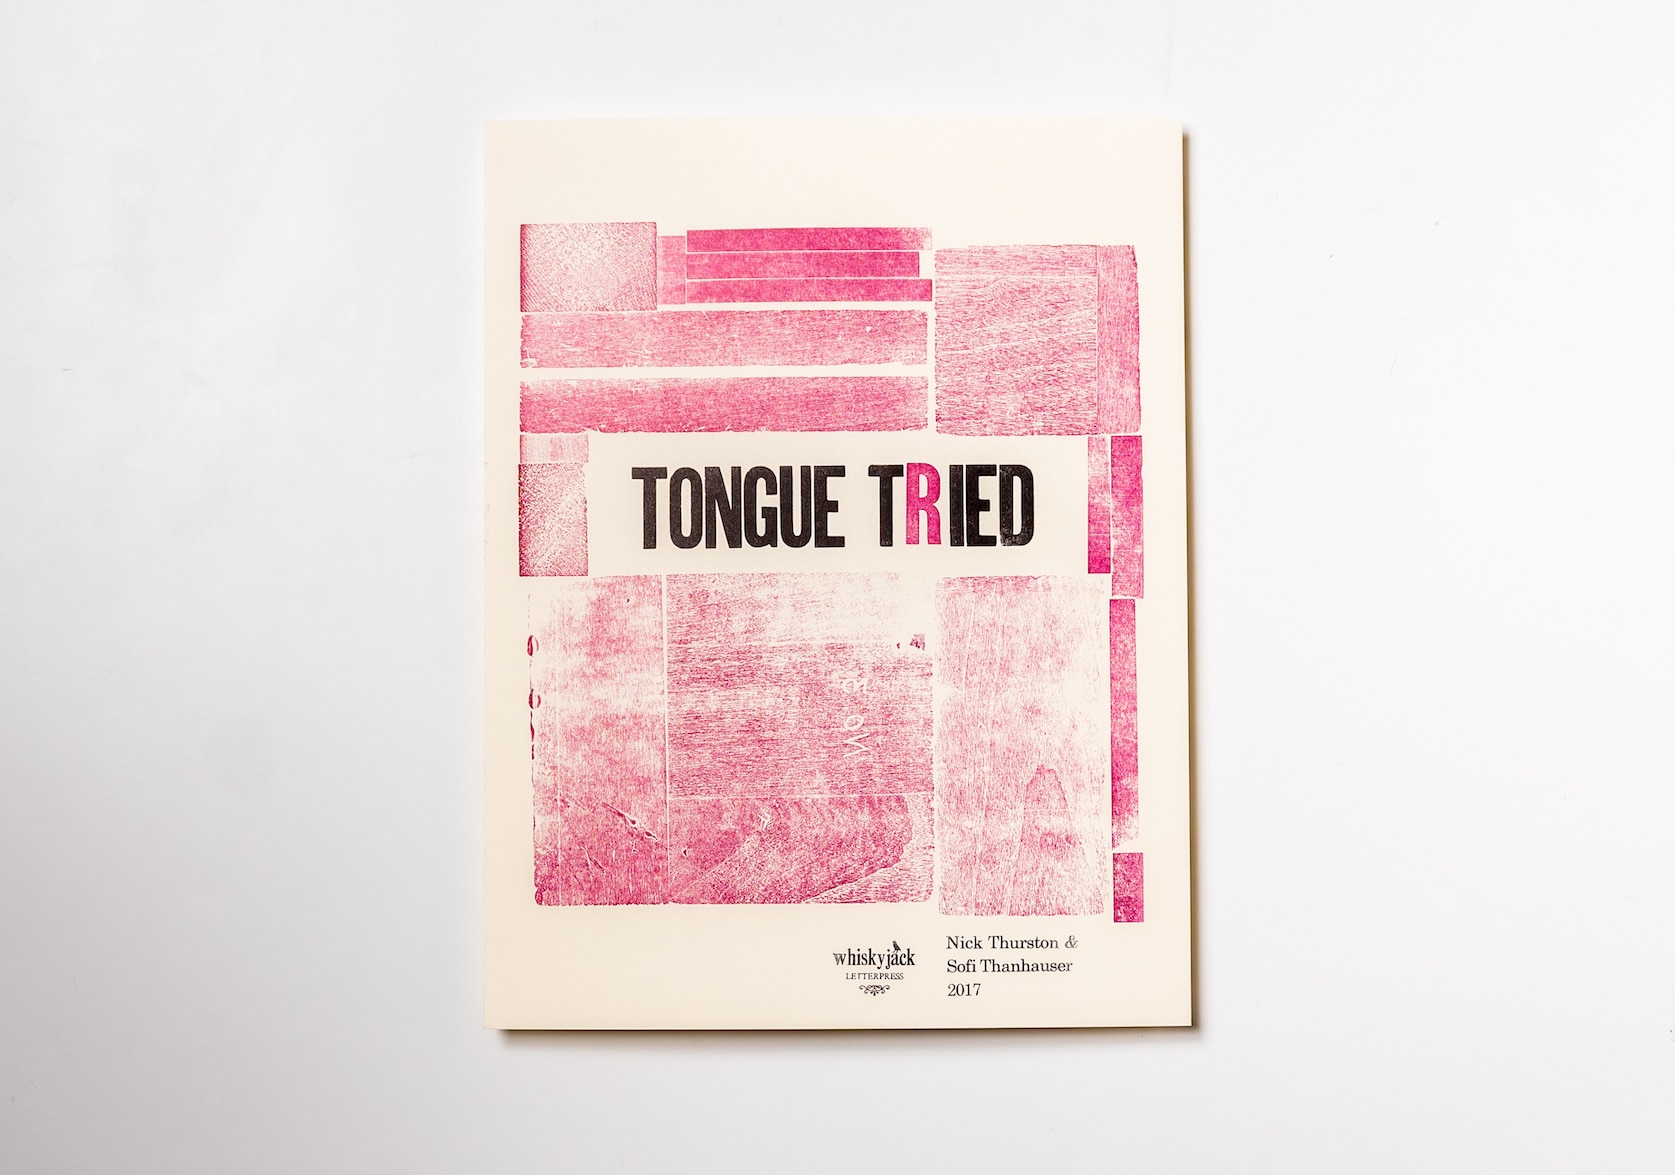 Tongue t(r)ied - broadside by Nick Thurston and Sofi Thanhauser